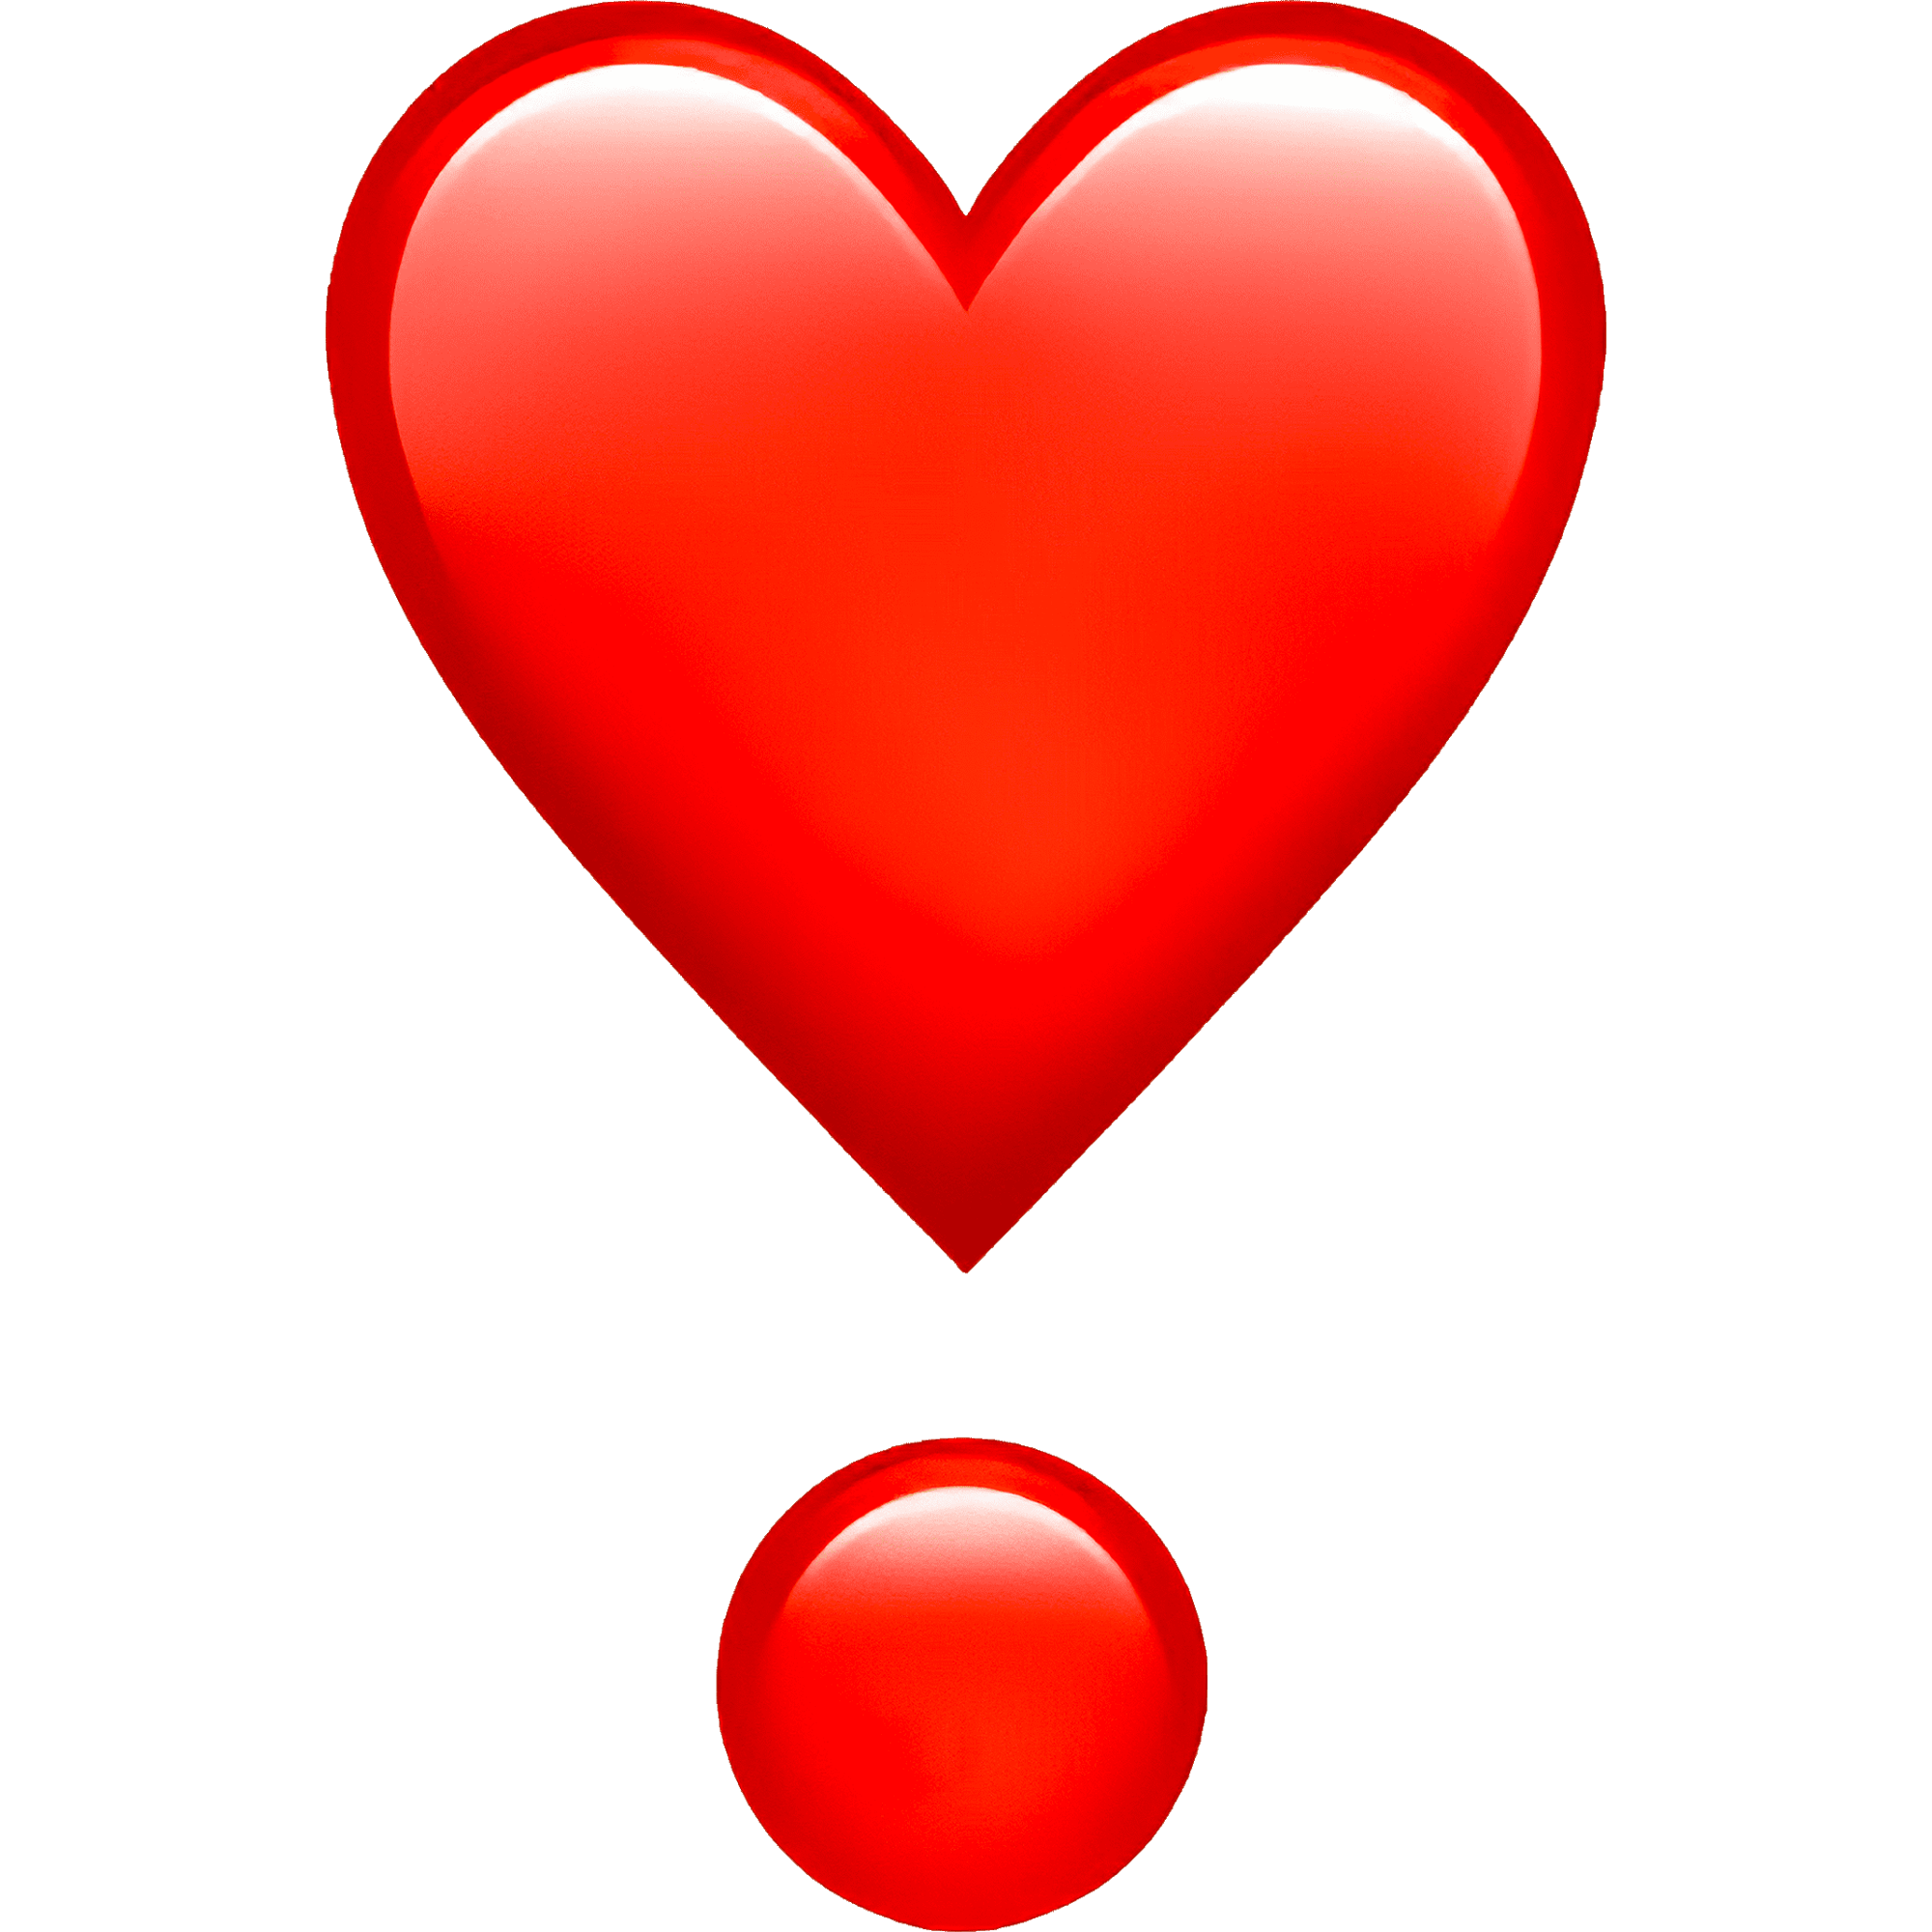 Exclamation Heart  Transparent Image